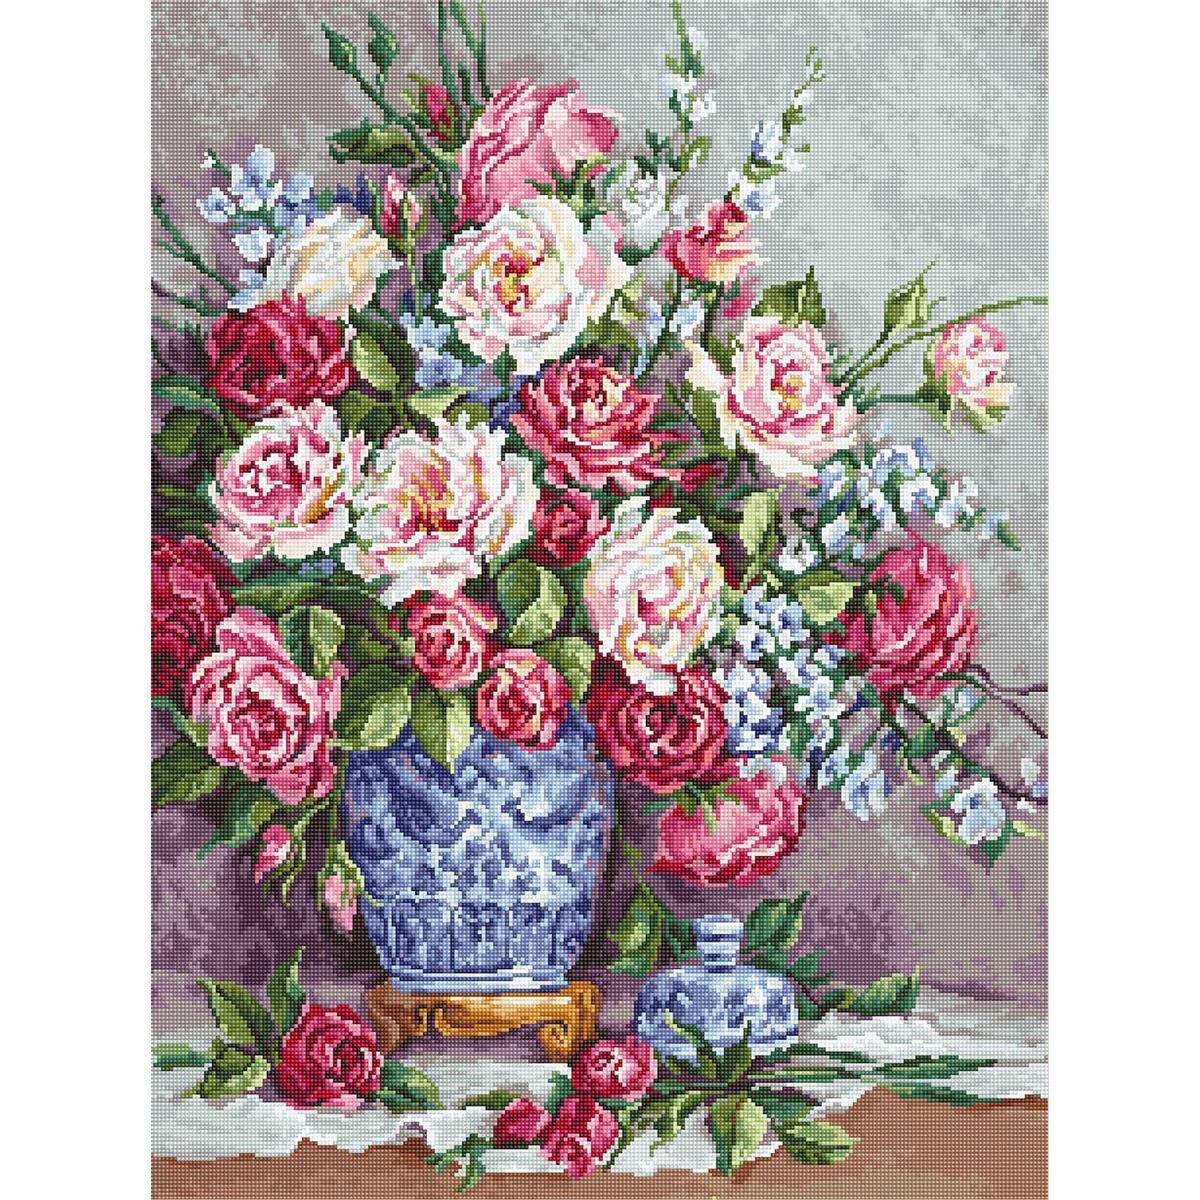 A vibrant floral arrangement of pink, white and red roses...